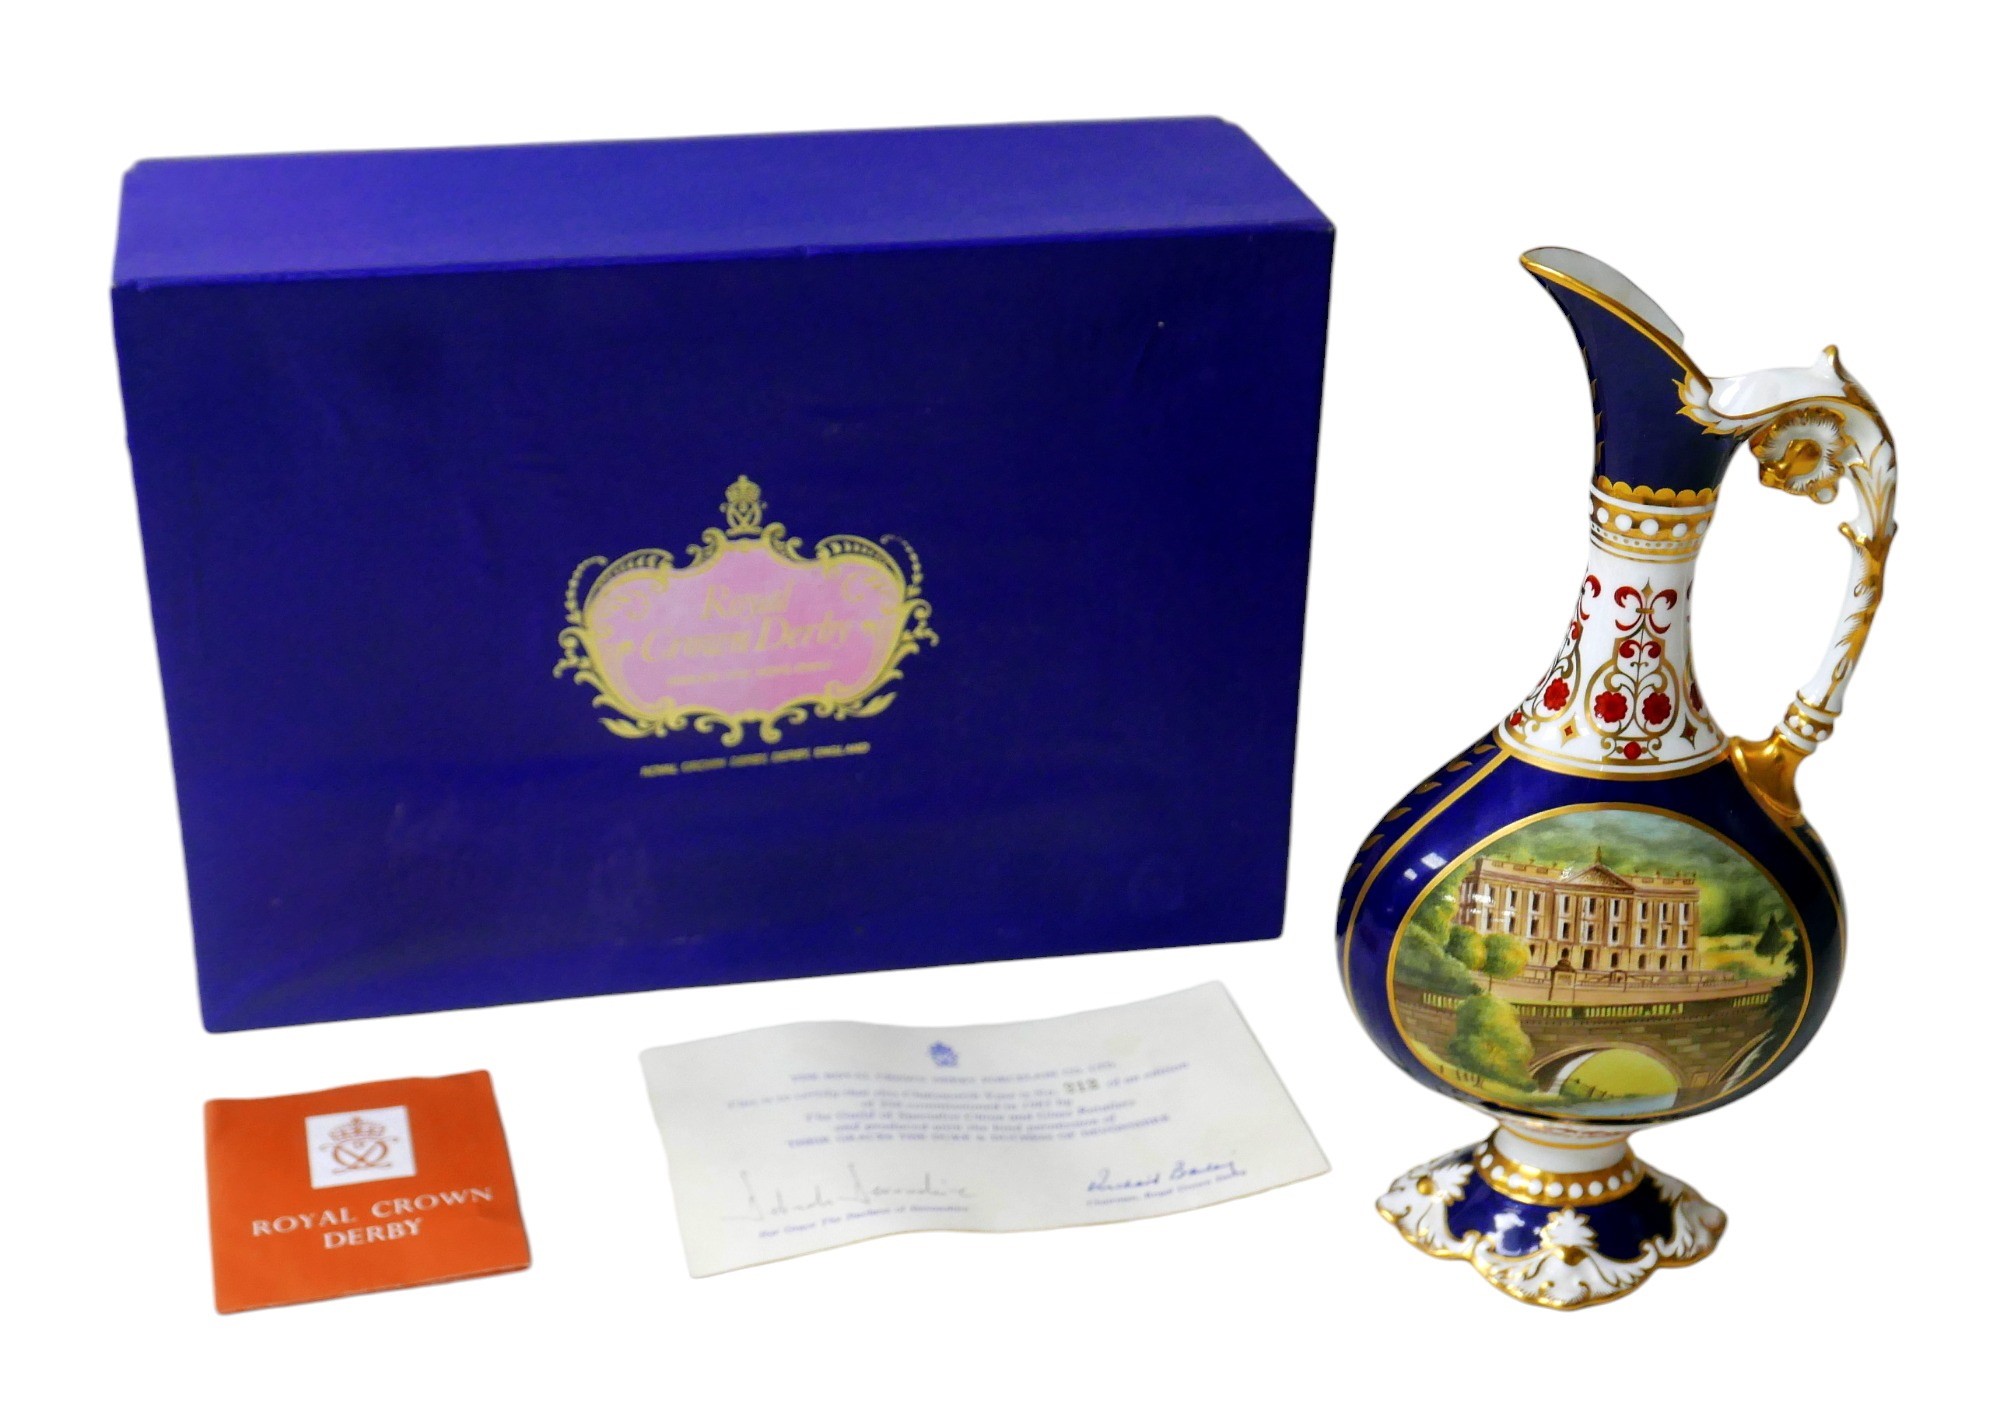 A Royal Crown Derby Chatsworth vase, 12.5 by 6.5 by 26cm high, with certificate numbered 213/250,